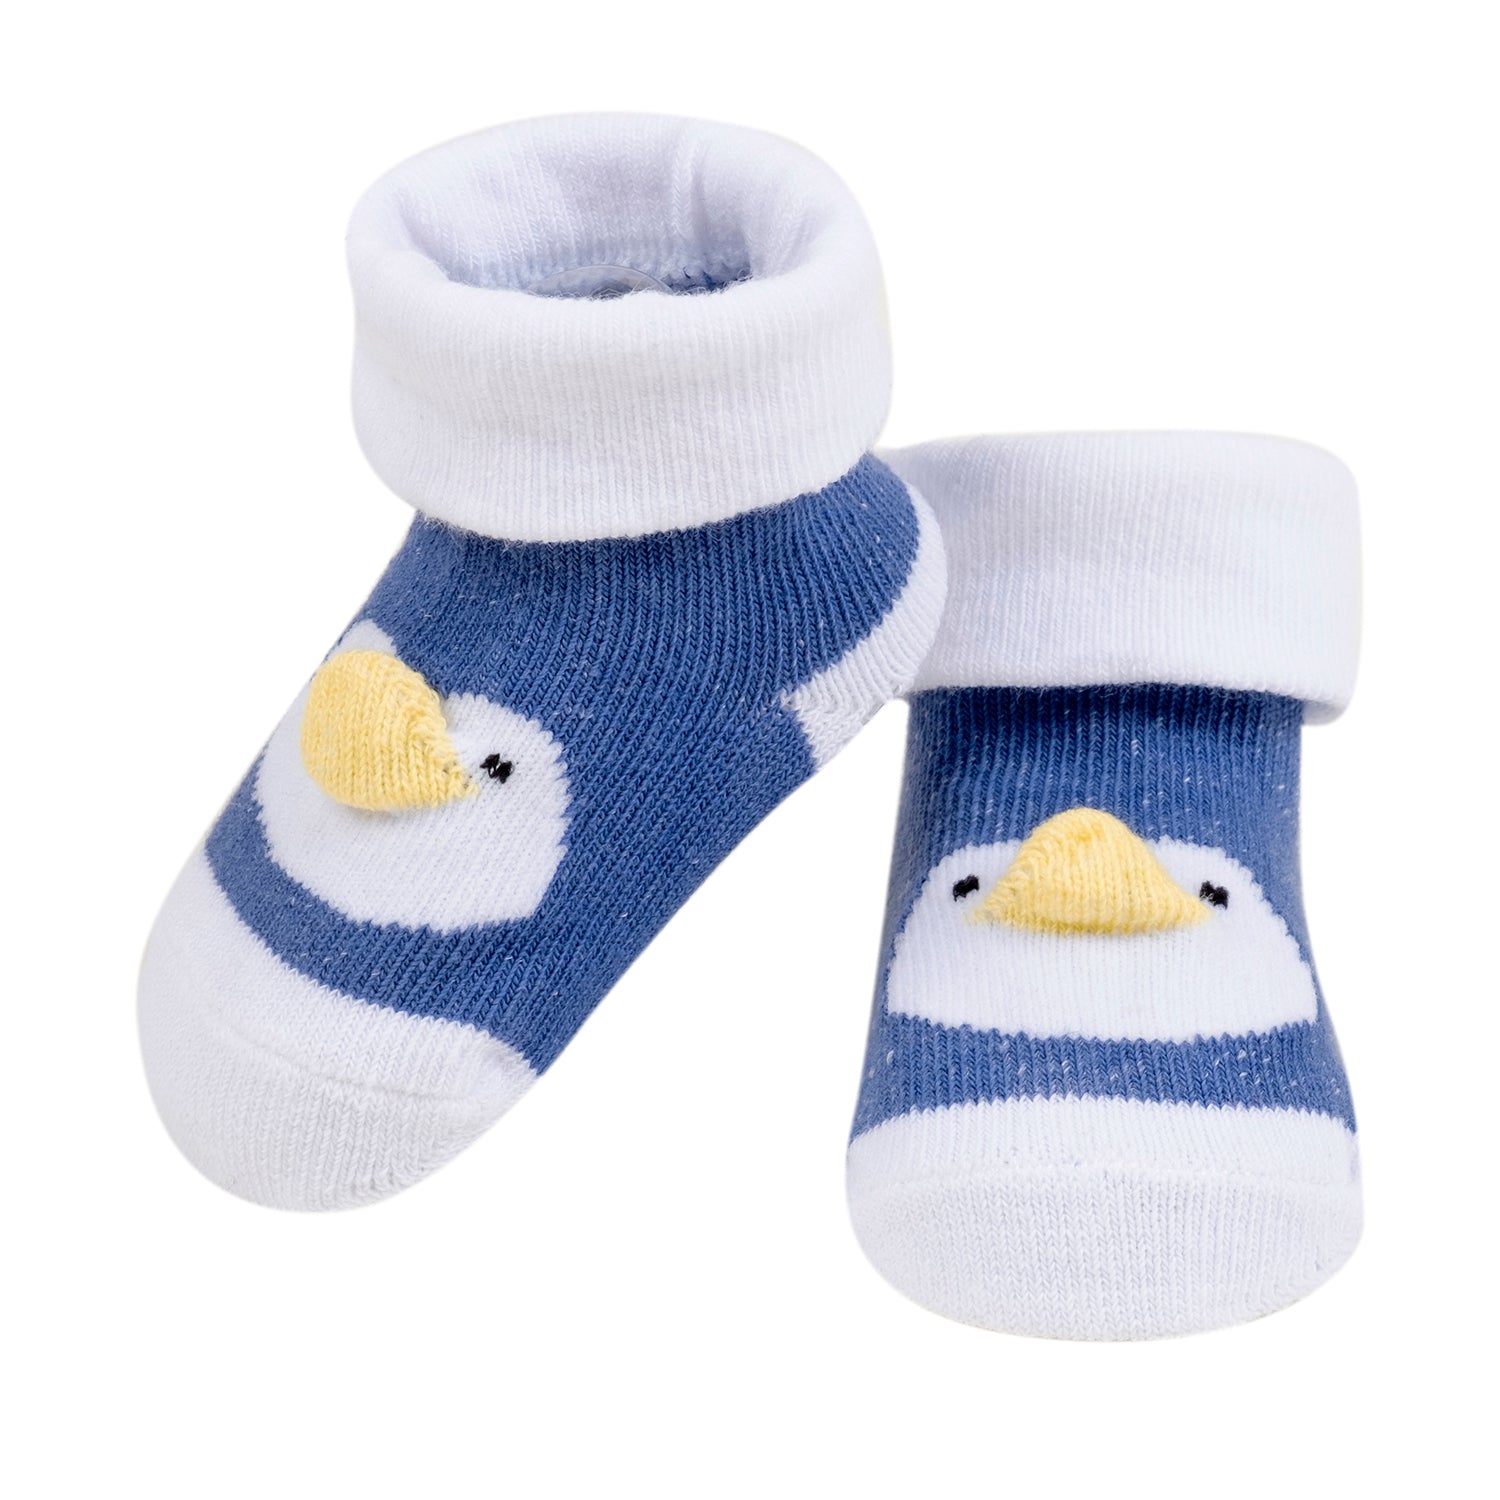 Baby Moo 3D Bear Duck Cotton Ankle Length Infant Dress Up Walking Set of 2 Socks Booties - Blue